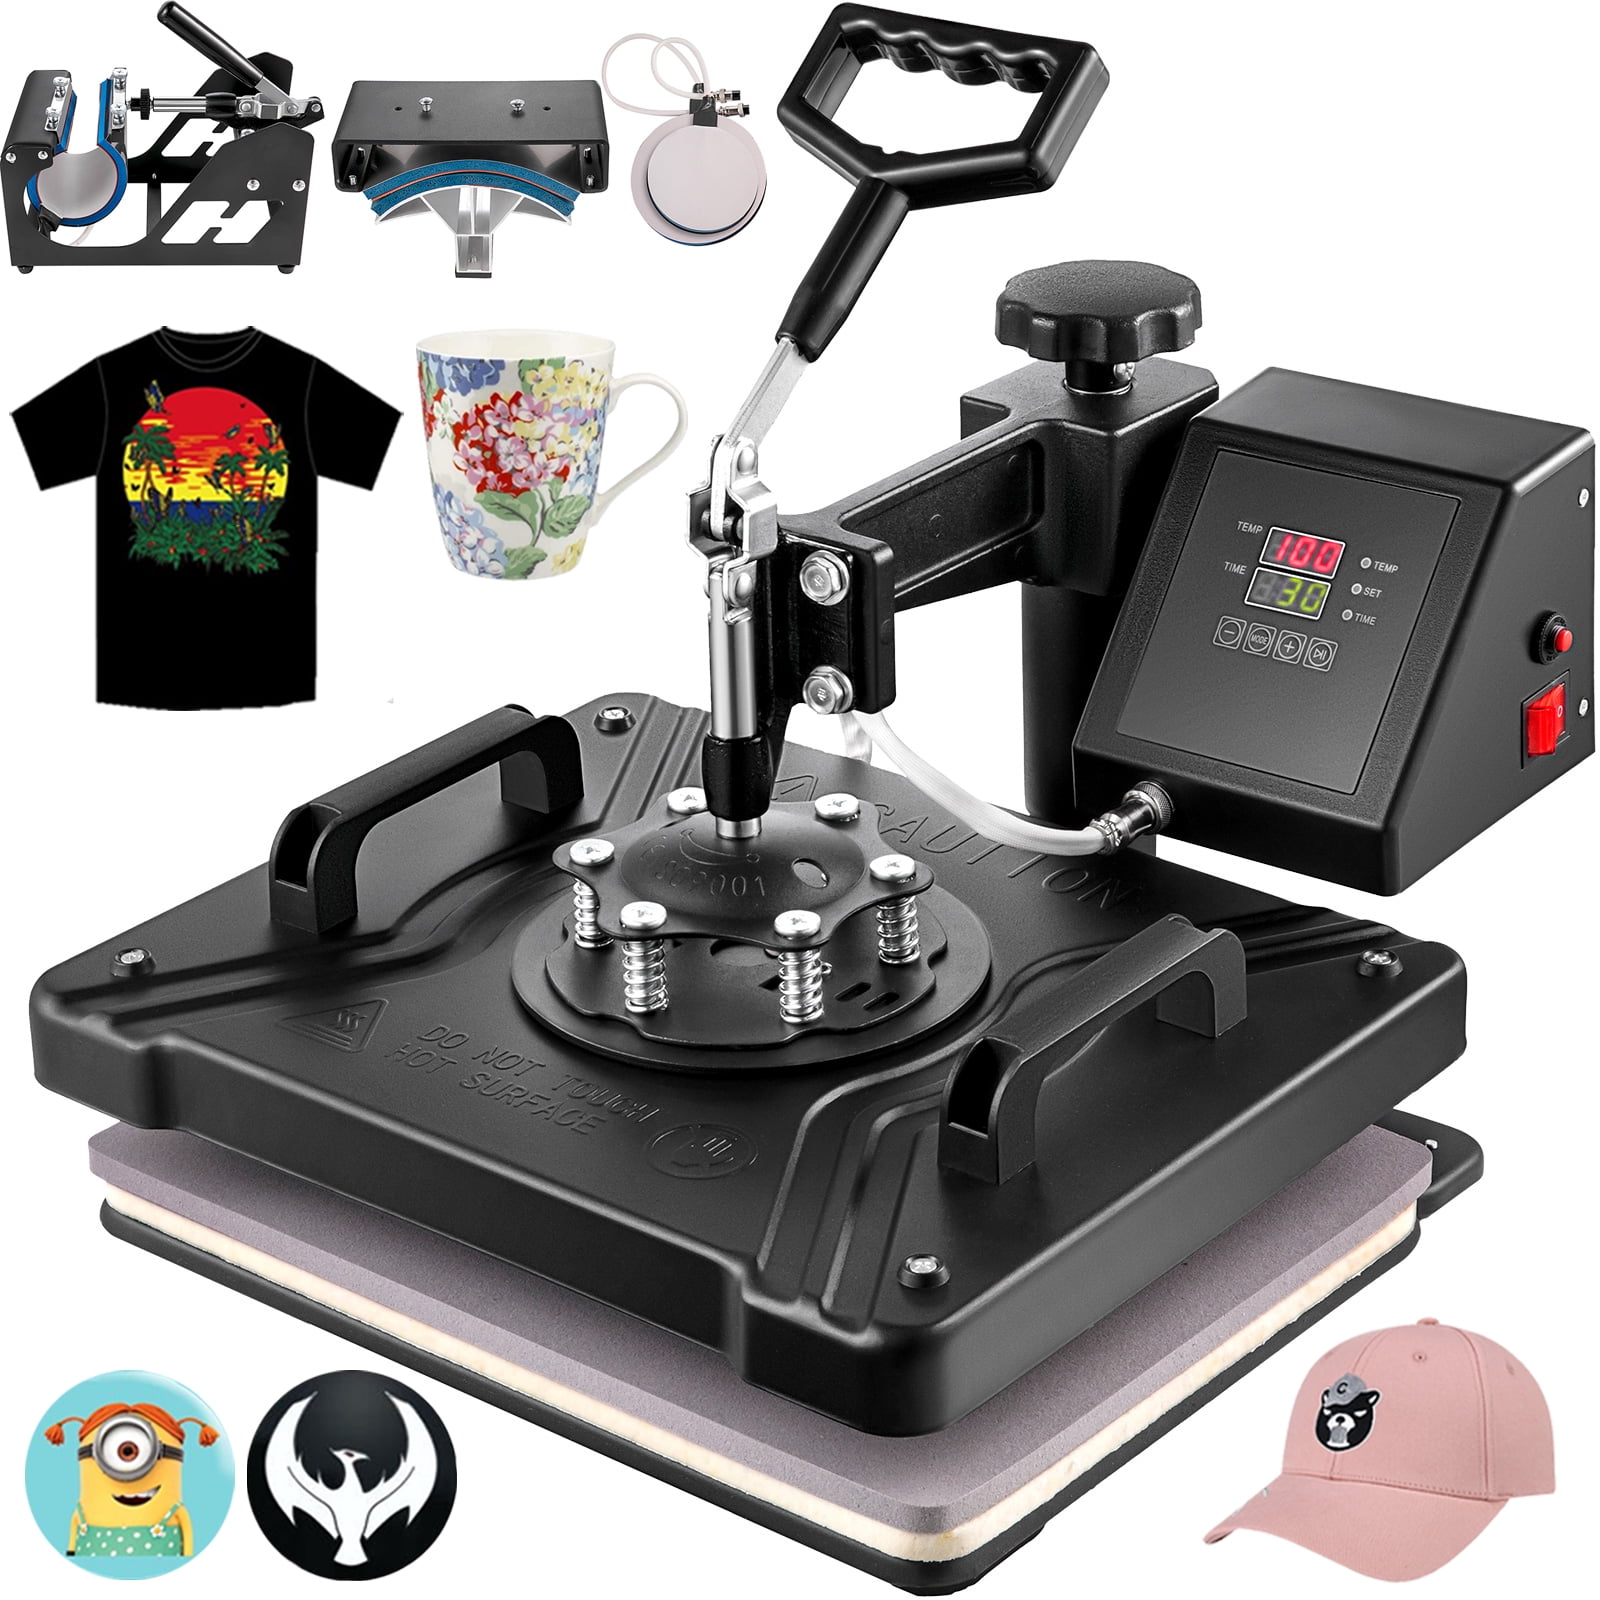 Power Heat Press Machine 12 X 15 Professional Swing Away Heat Transfer 5 in 1 Digital Sublimation 360-Degree Rotation Multifunction Combo for T-Shirt Mugs Hat Plate Cap 